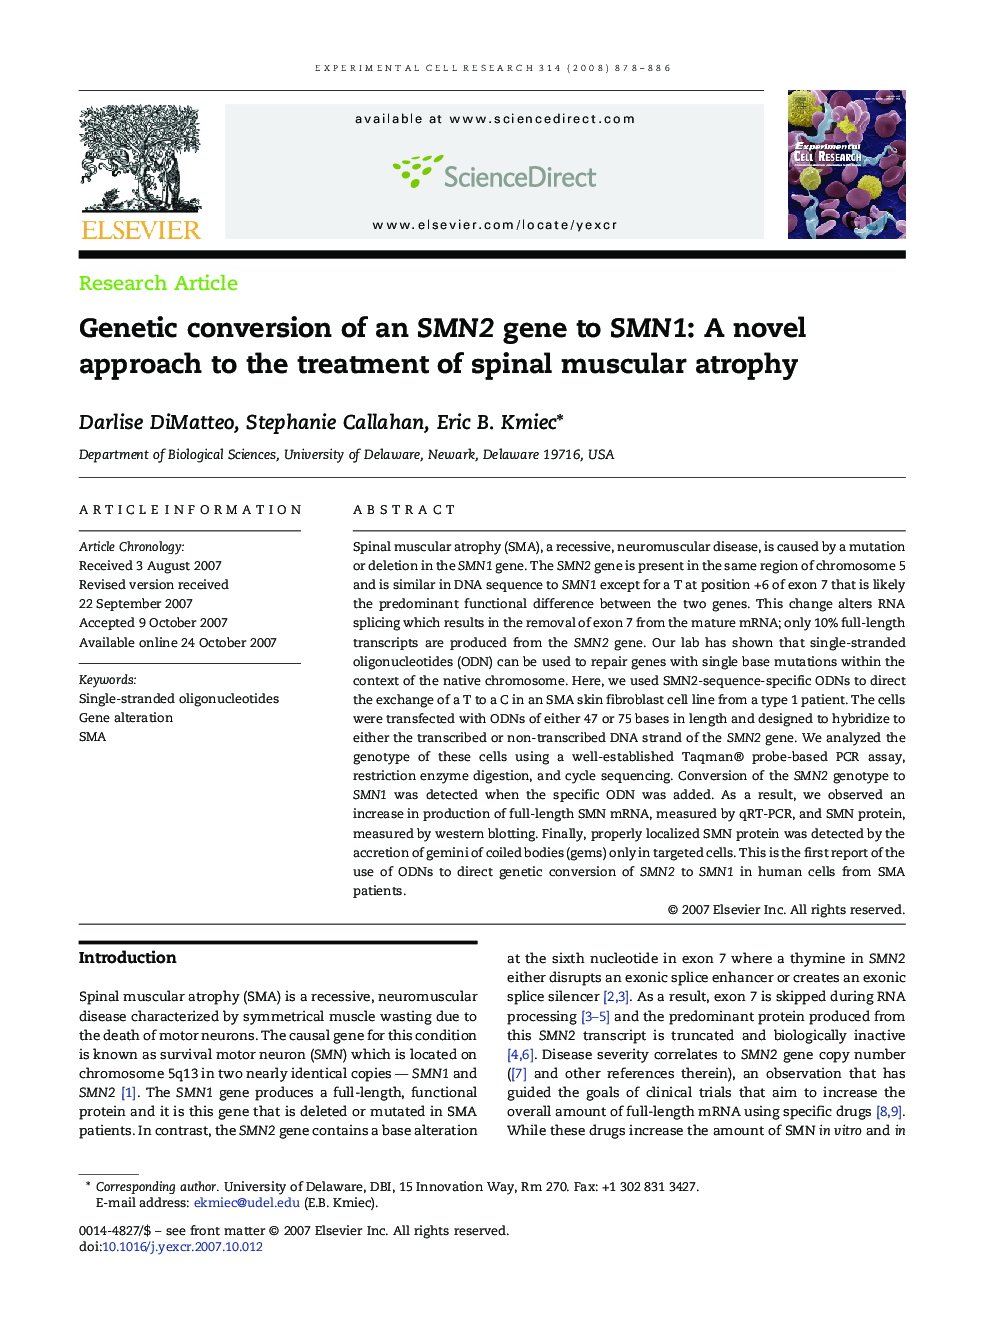 Genetic conversion of an SMN2 gene to SMN1: A novel approach to the treatment of spinal muscular atrophy